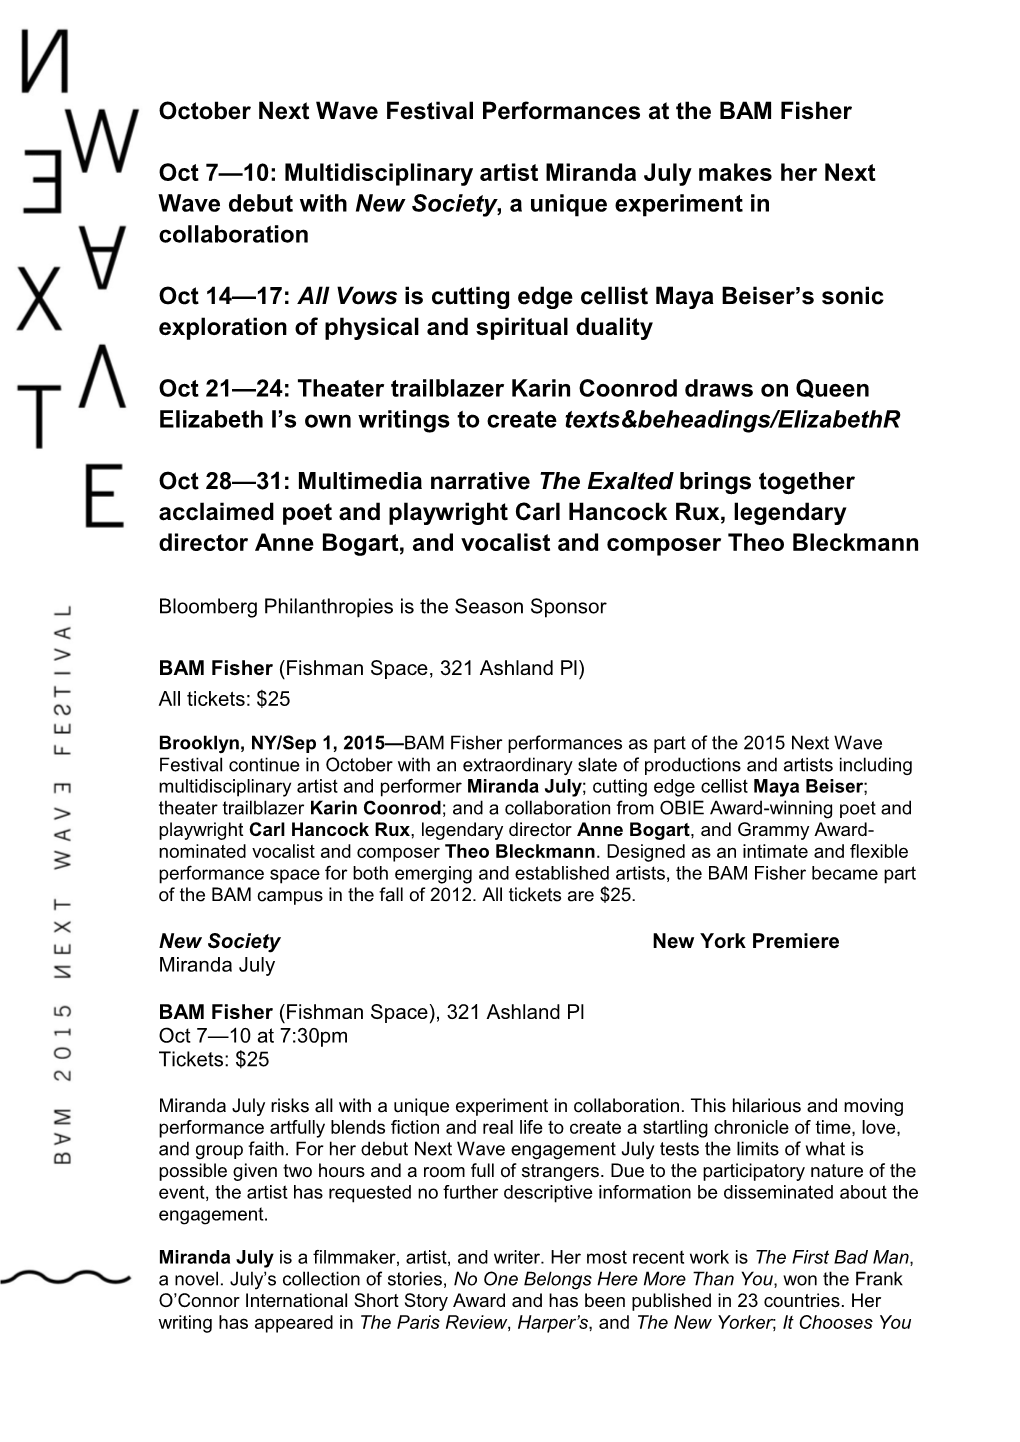 October Next Wave Festival Performances at the BAM Fisher